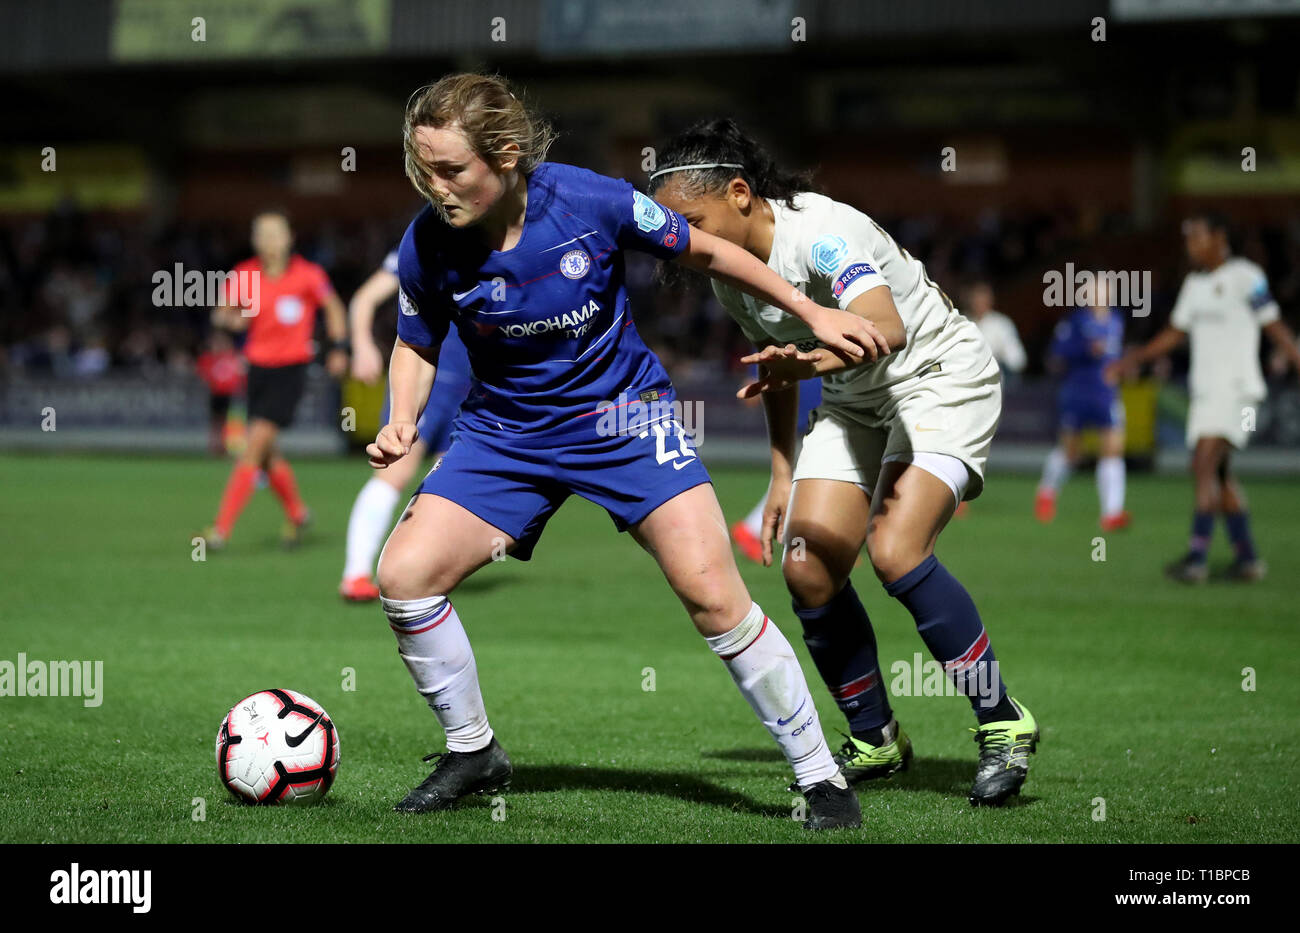 Chelsea Women's Erin Cuthbert in action with Paris Saint-Germain Women's Perle Morroni during the UEFA Women's Champions League quarter final first leg match at the Cherry Red Records Stadium, London. Stock Photo